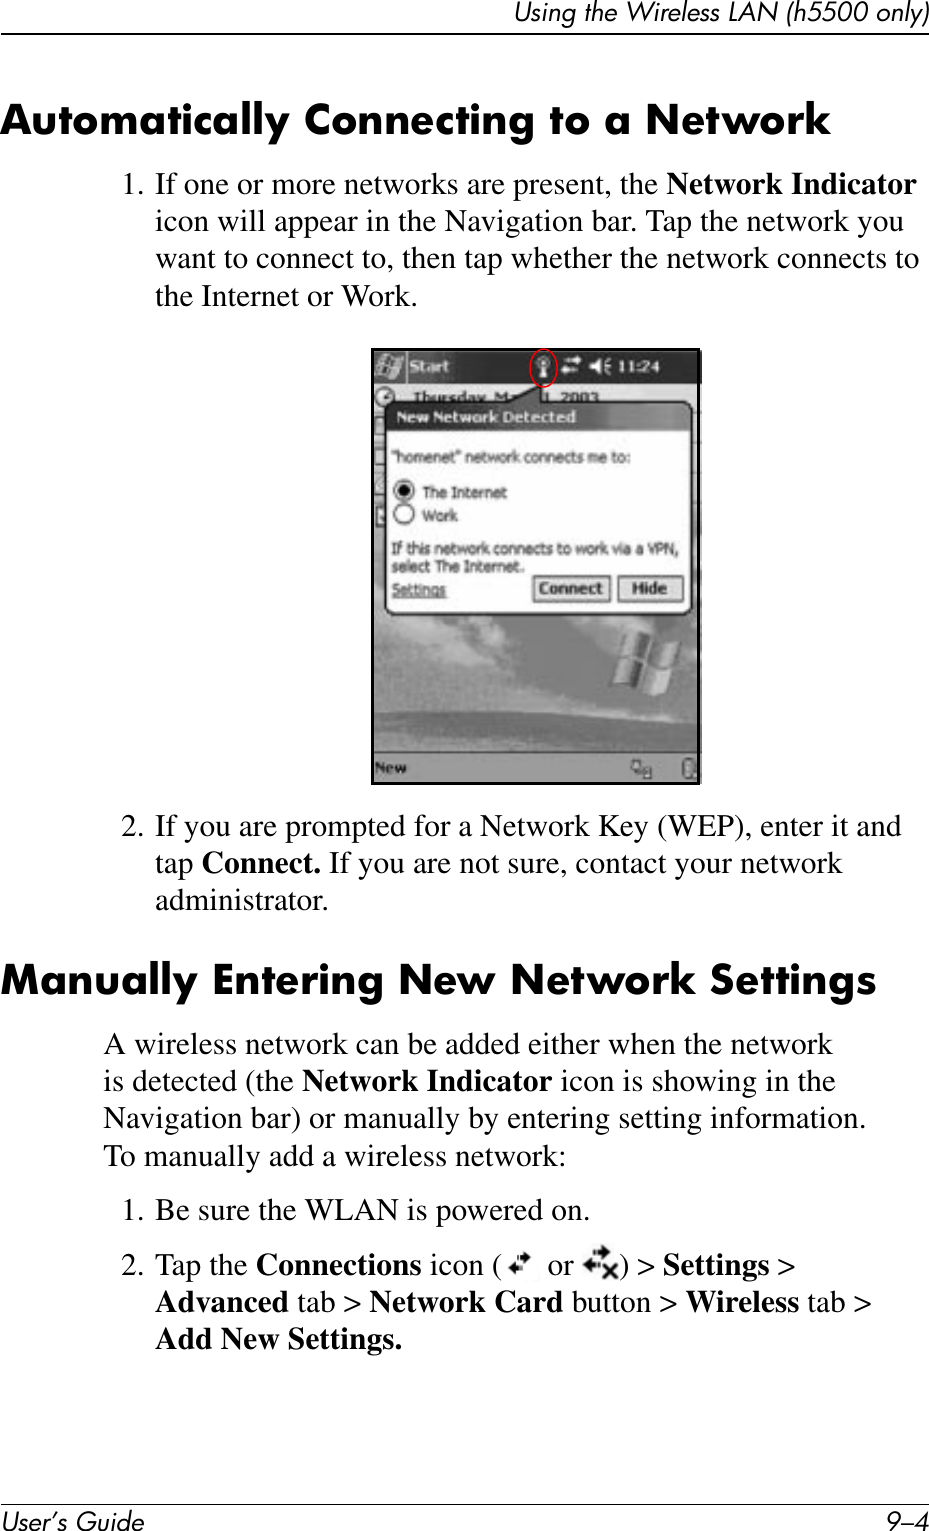 User’s Guide 9–4Using the Wireless LAN (h5500 only)Automatically Connecting to a Network1. If one or more networks are present, the Network Indicator icon will appear in the Navigation bar. Tap the network you want to connect to, then tap whether the network connects to the Internet or Work.2. If you are prompted for a Network Key (WEP), enter it and tap Connect. If you are not sure, contact your network administrator.Manually Entering New Network SettingsA wireless network can be added either when the network is detected (the Network Indicator icon is showing in the Navigation bar) or manually by entering setting information. To manually add a wireless network:1. Be sure the WLAN is powered on.2. Tap the Connections icon (  or  ) &gt; Settings &gt; Advanced tab &gt; Network Card button &gt; Wireless tab &gt; Add New Settings.